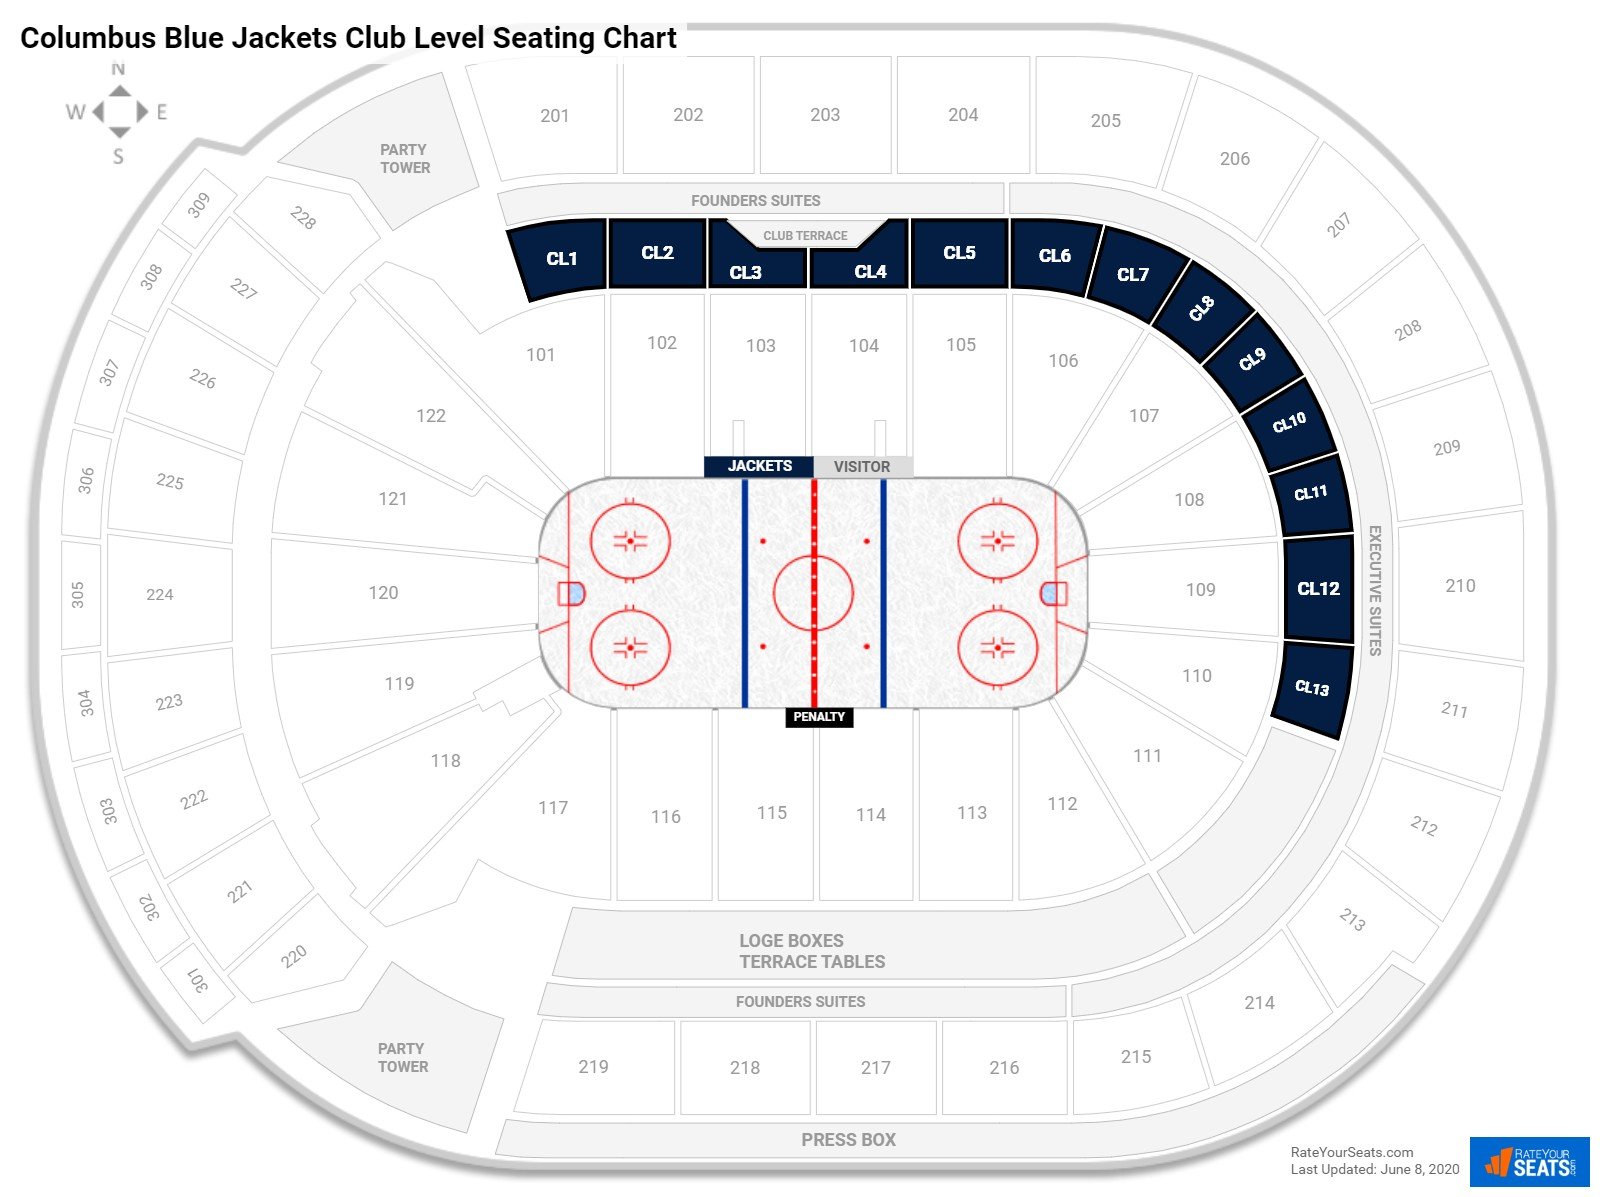 Nationwide Arena Seating Chart With Seat Numbers